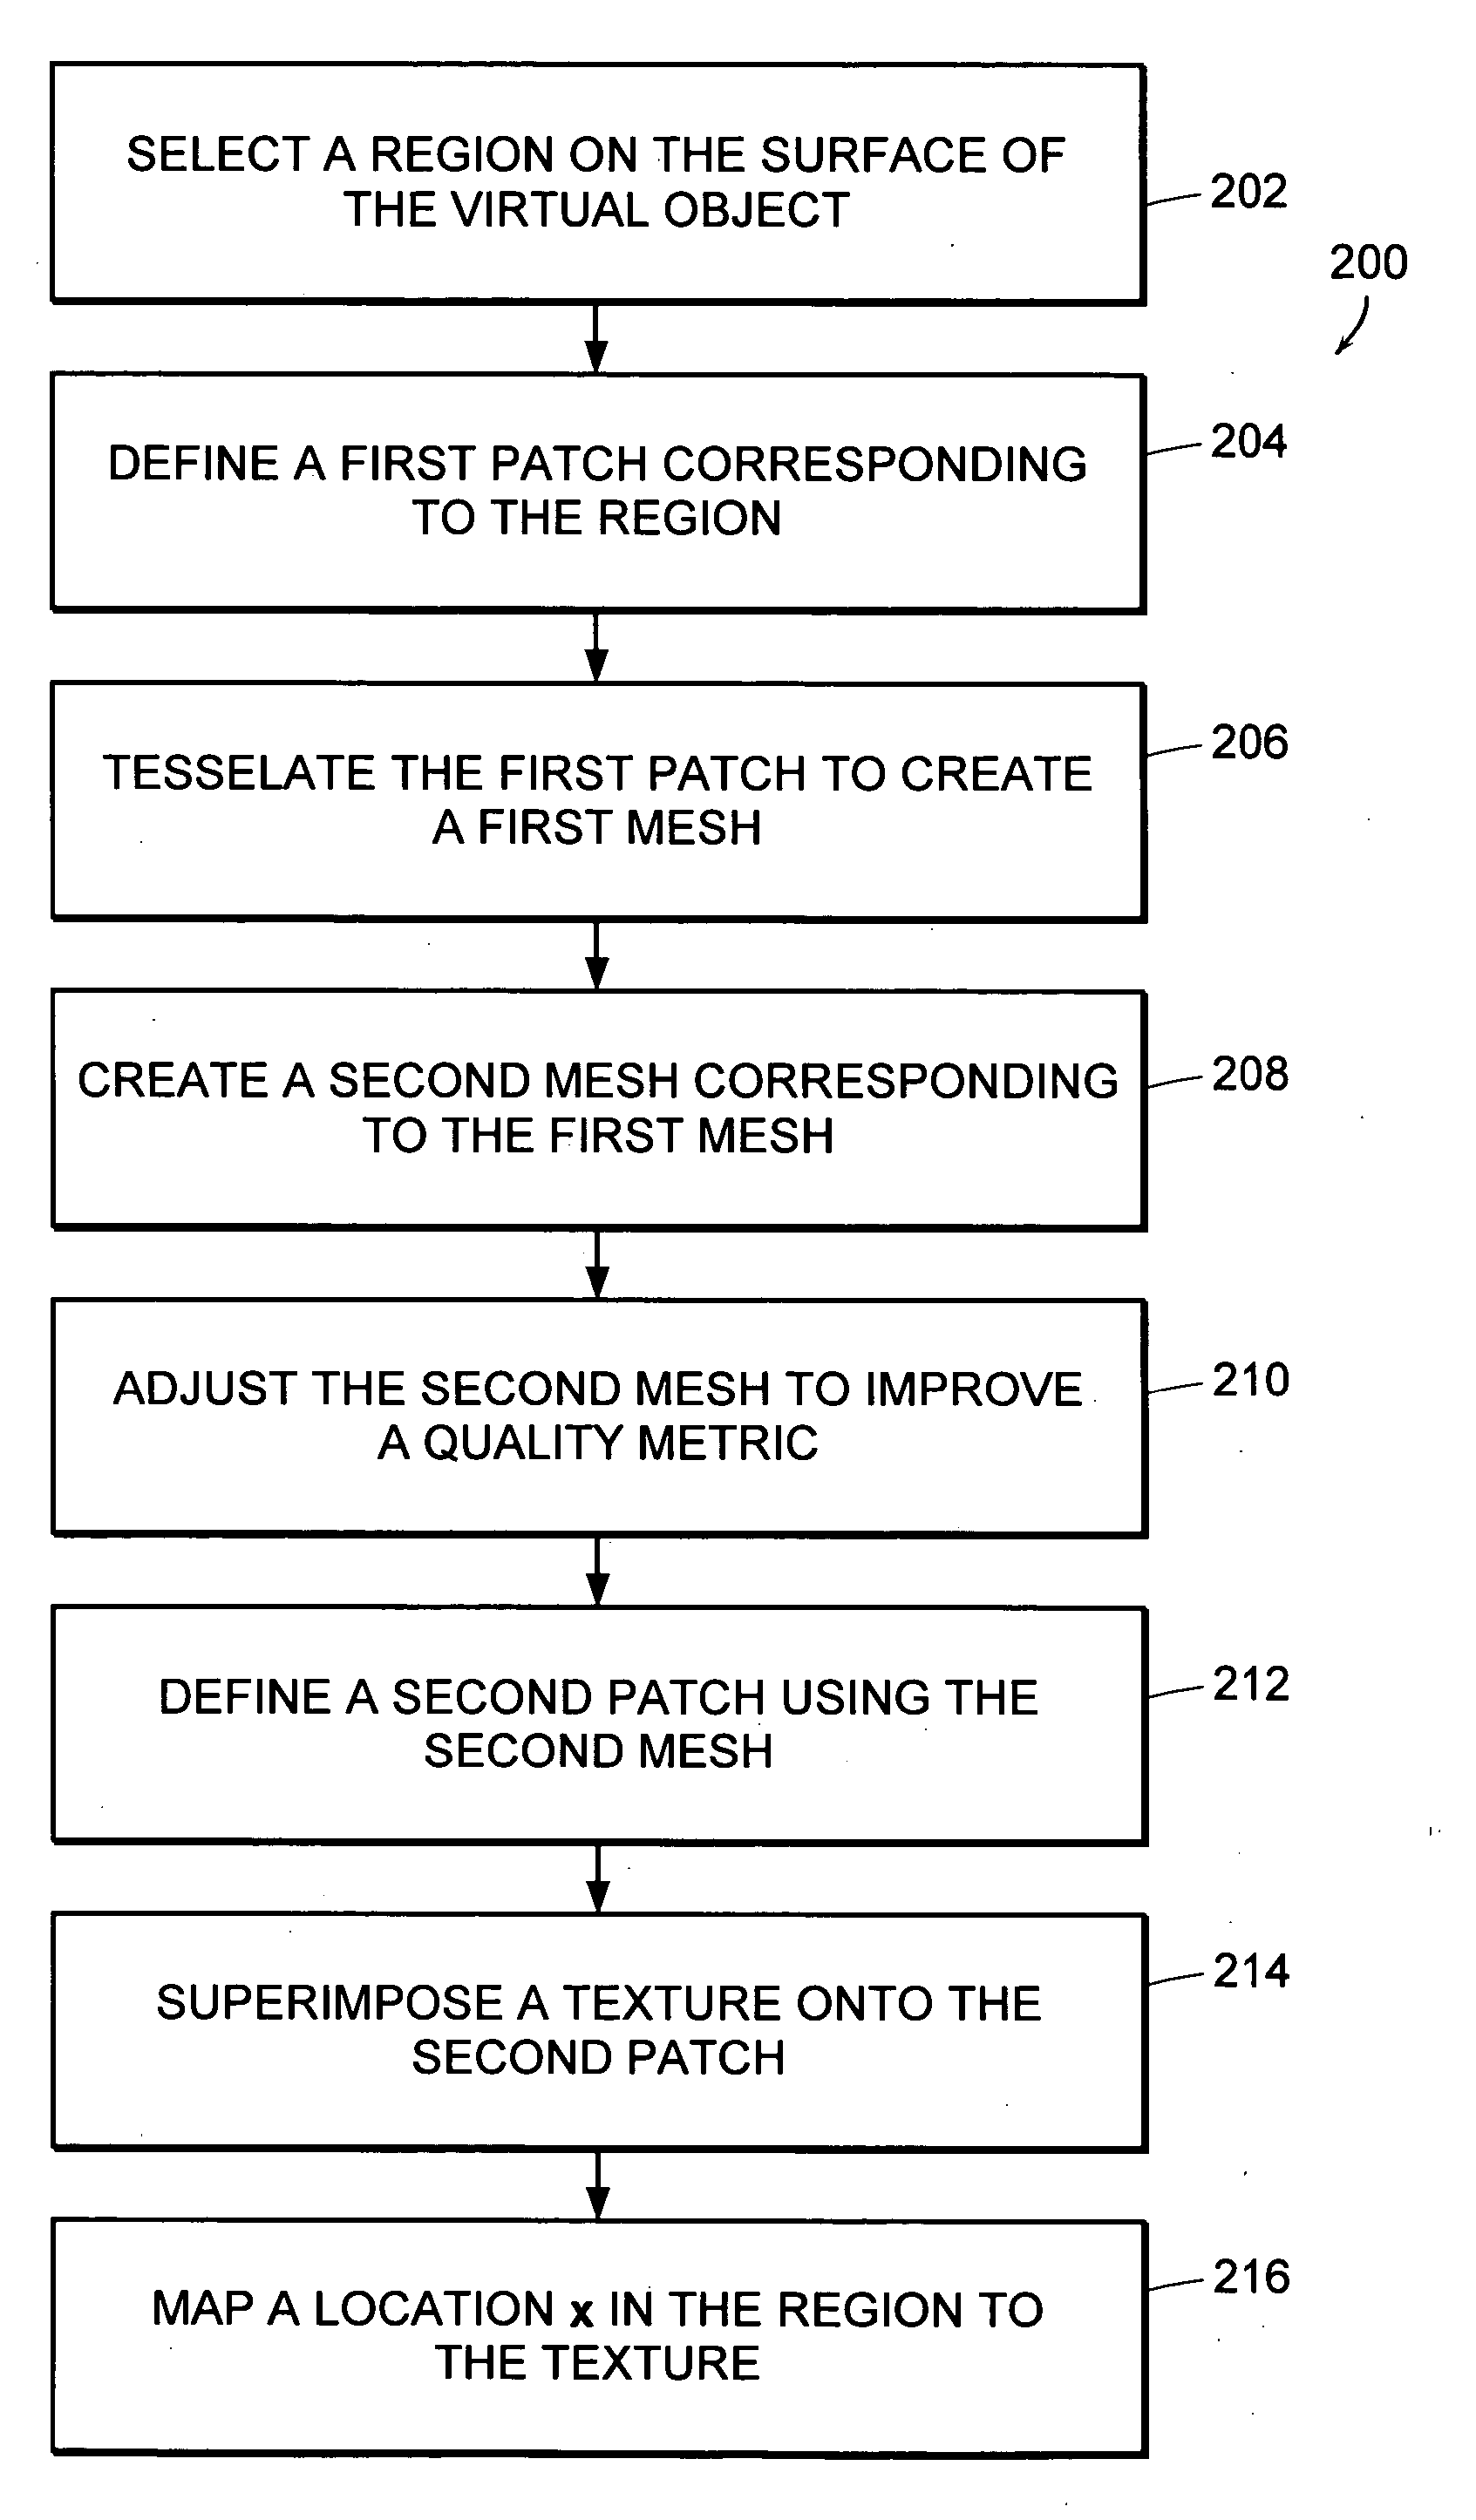 Apparatus and methods for wrapping texture onto the surface of a virtual object